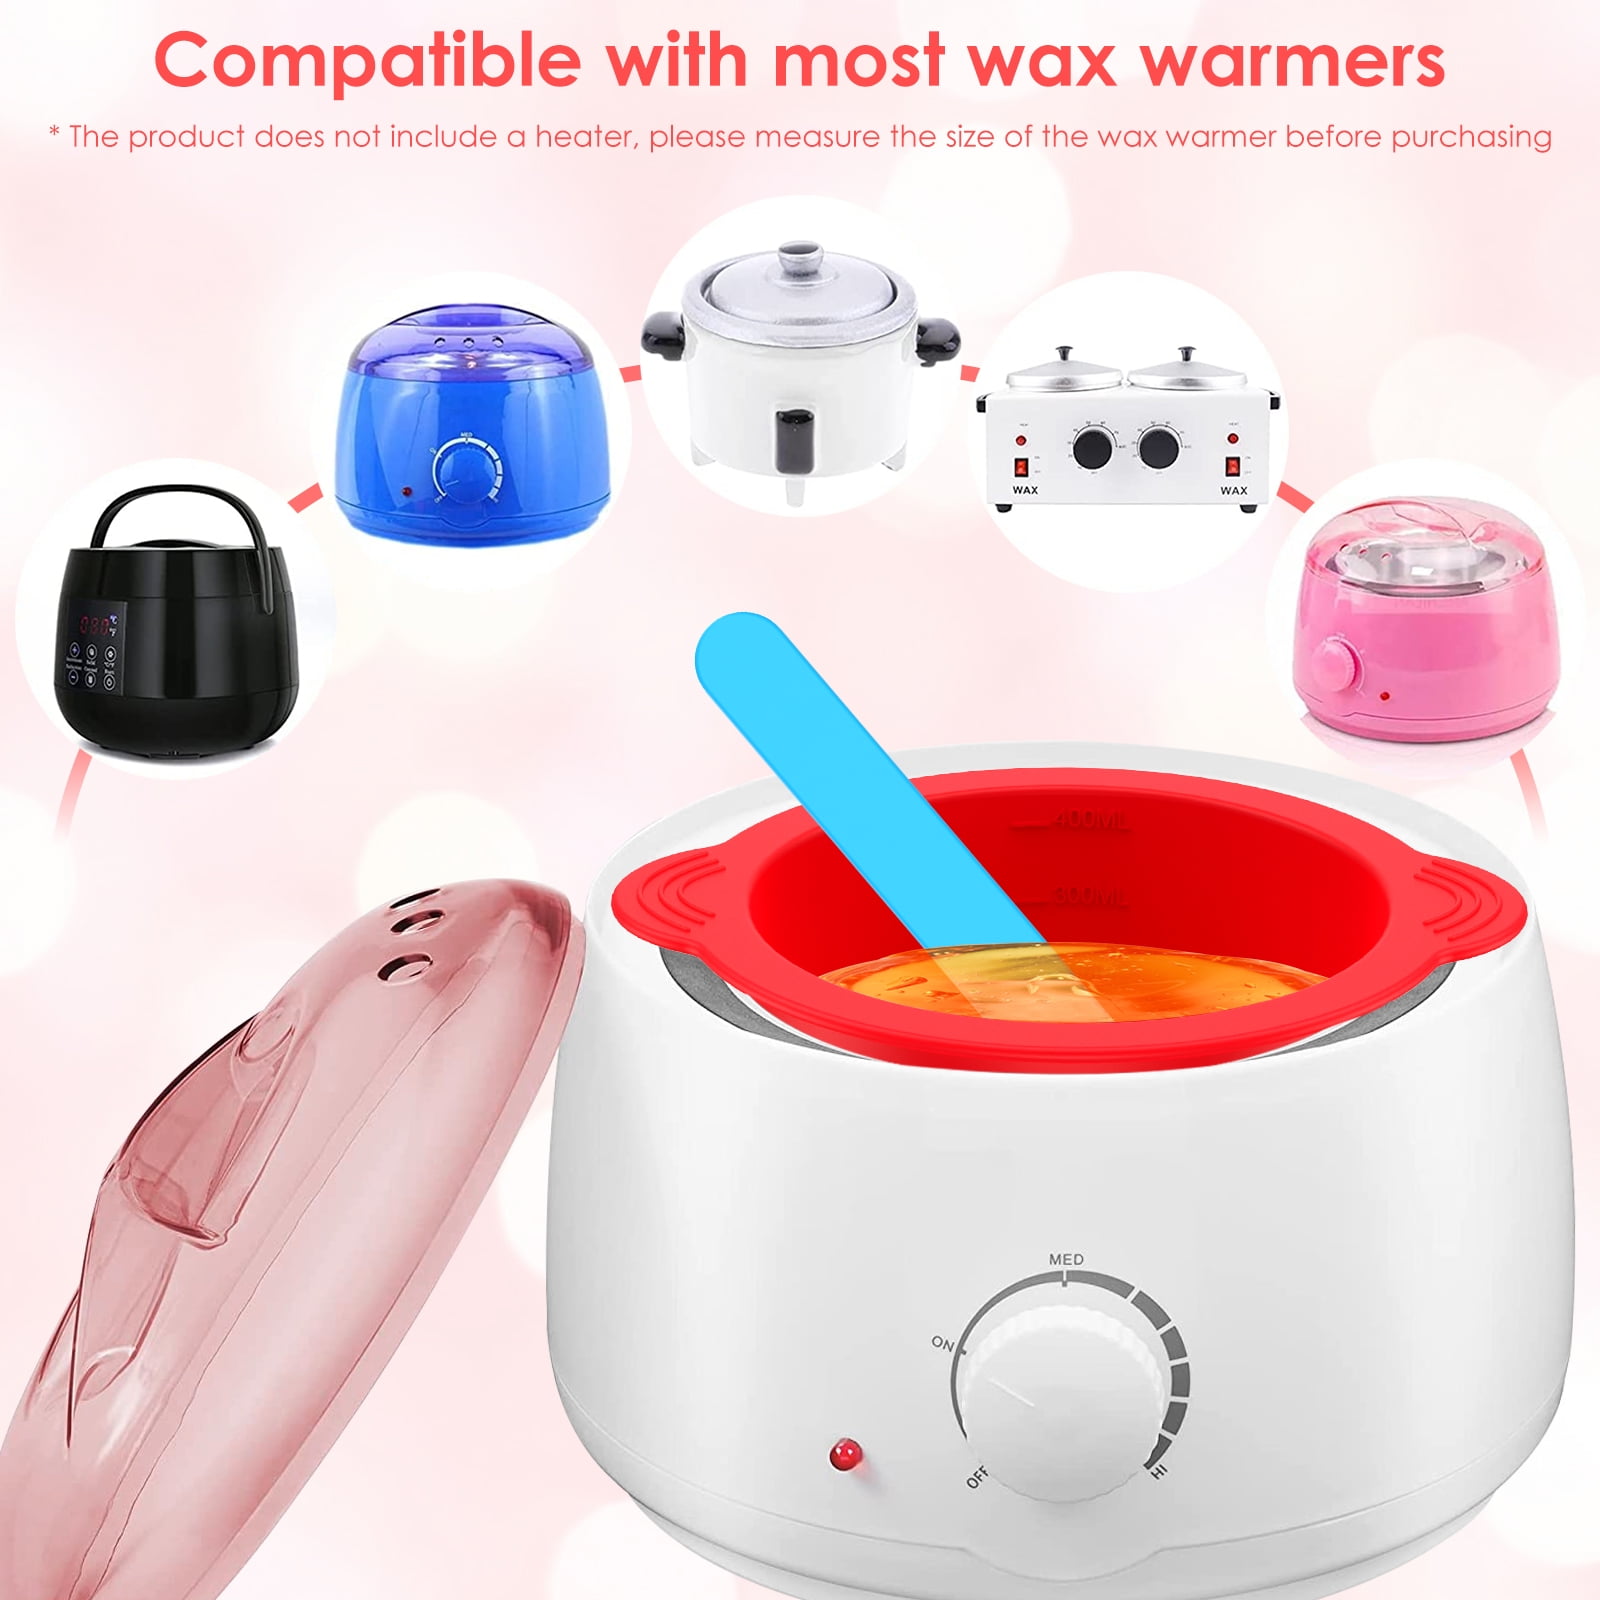  4 PCS Silicone Wax Warmer Liner, Wax Pot Liner Come with 8 PCS  Reusable Silicone Wax Stick, Silicone Wax Bowl Compatible with 16oz Hair  Removal Waxing Kit : Beauty & Personal Care